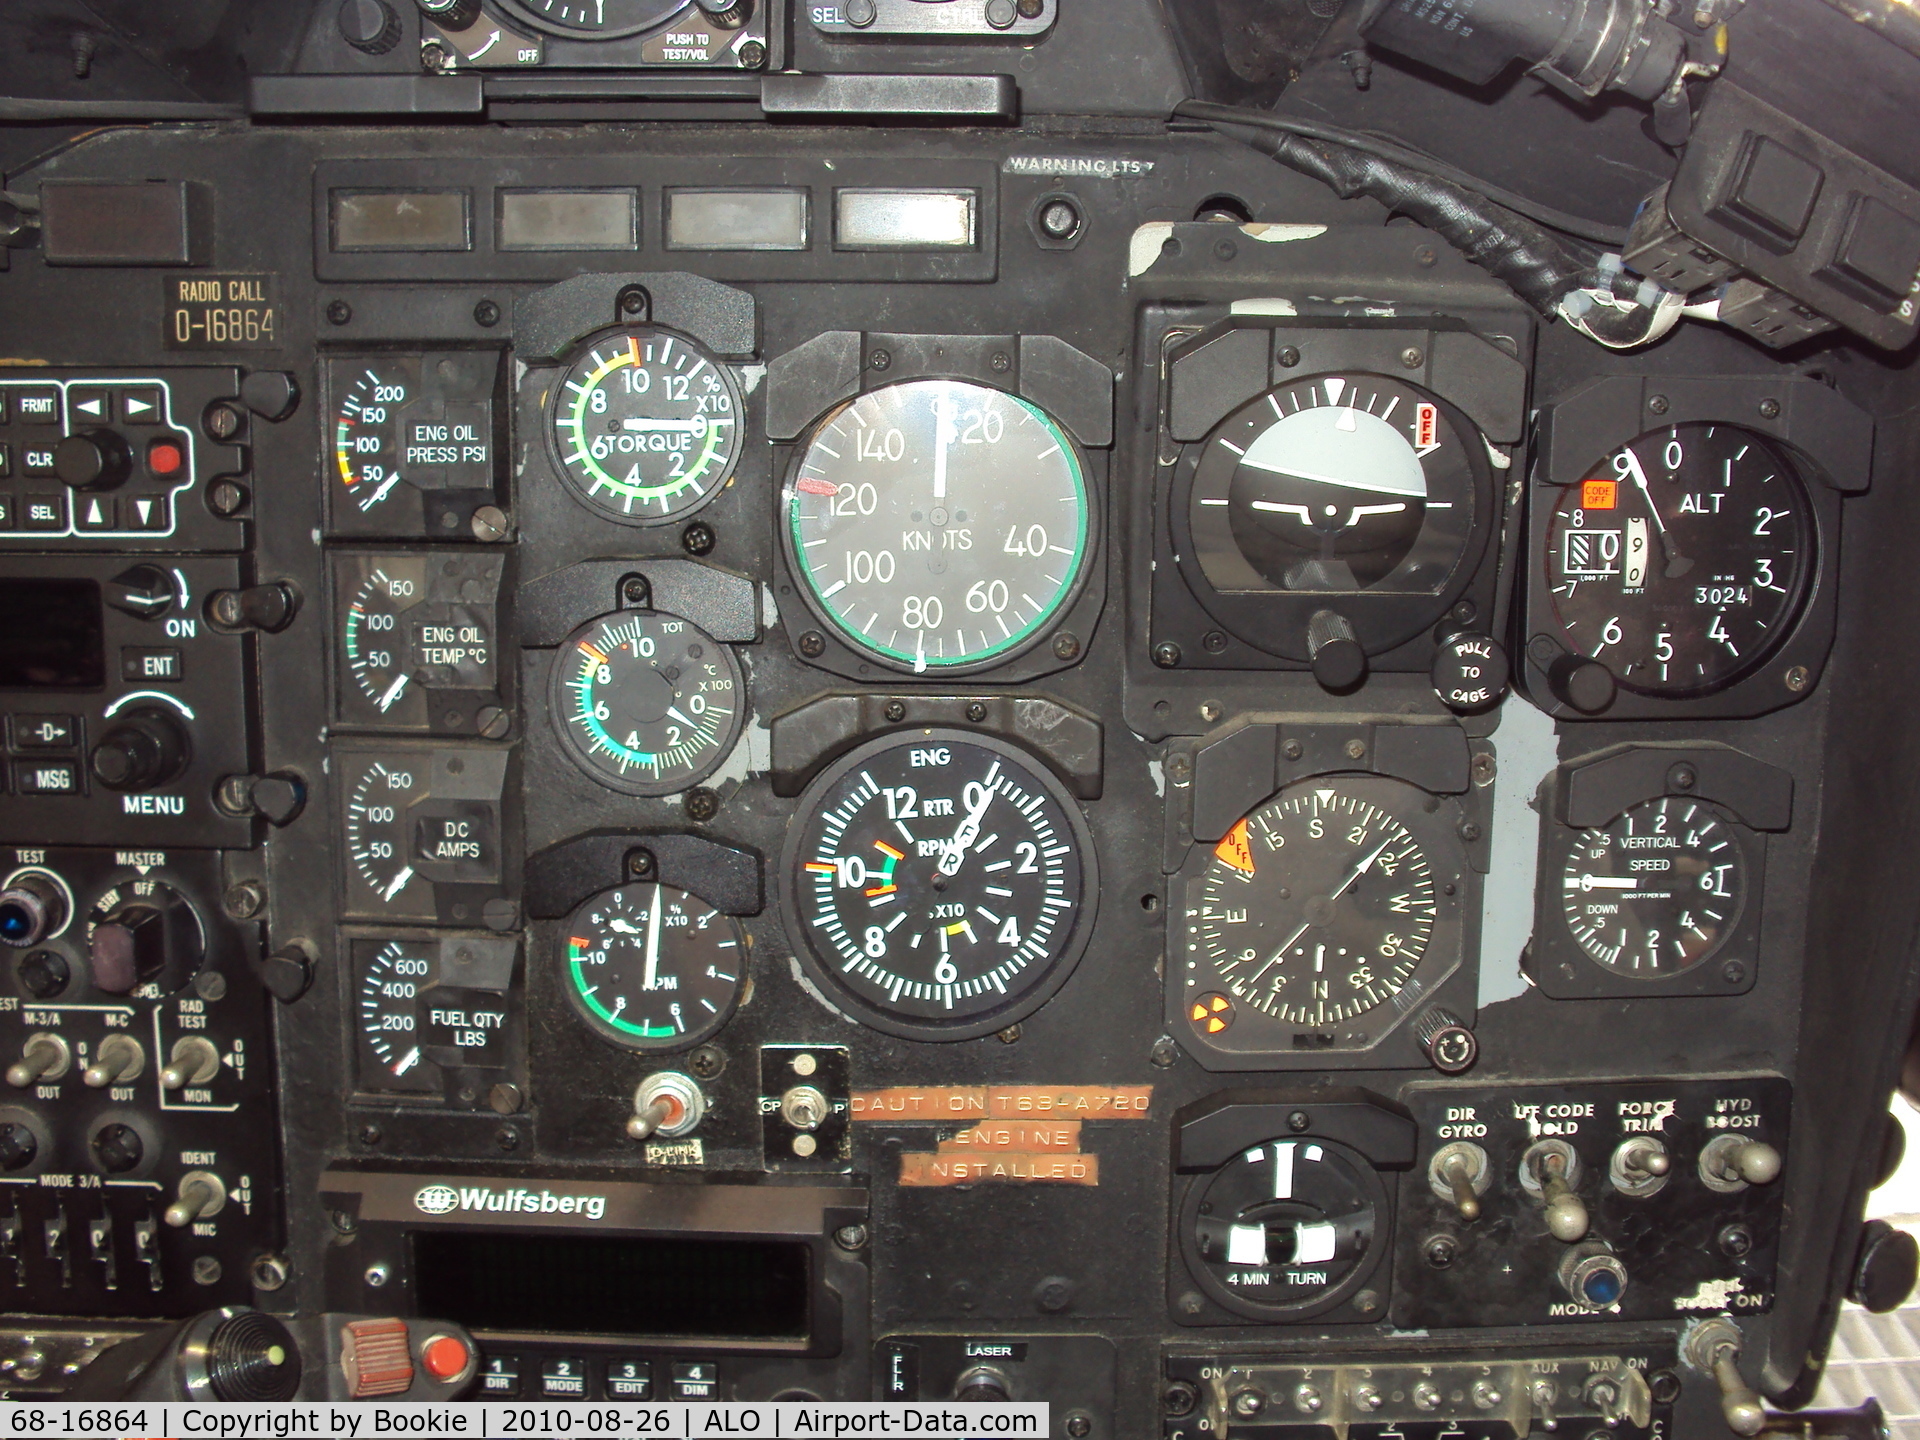 68-16864, 1968 Bell OH-58A Kiowa C/N 40178, Here's the old girl's instrument panel.  It's been upgraded, but still looks oh so familiar!